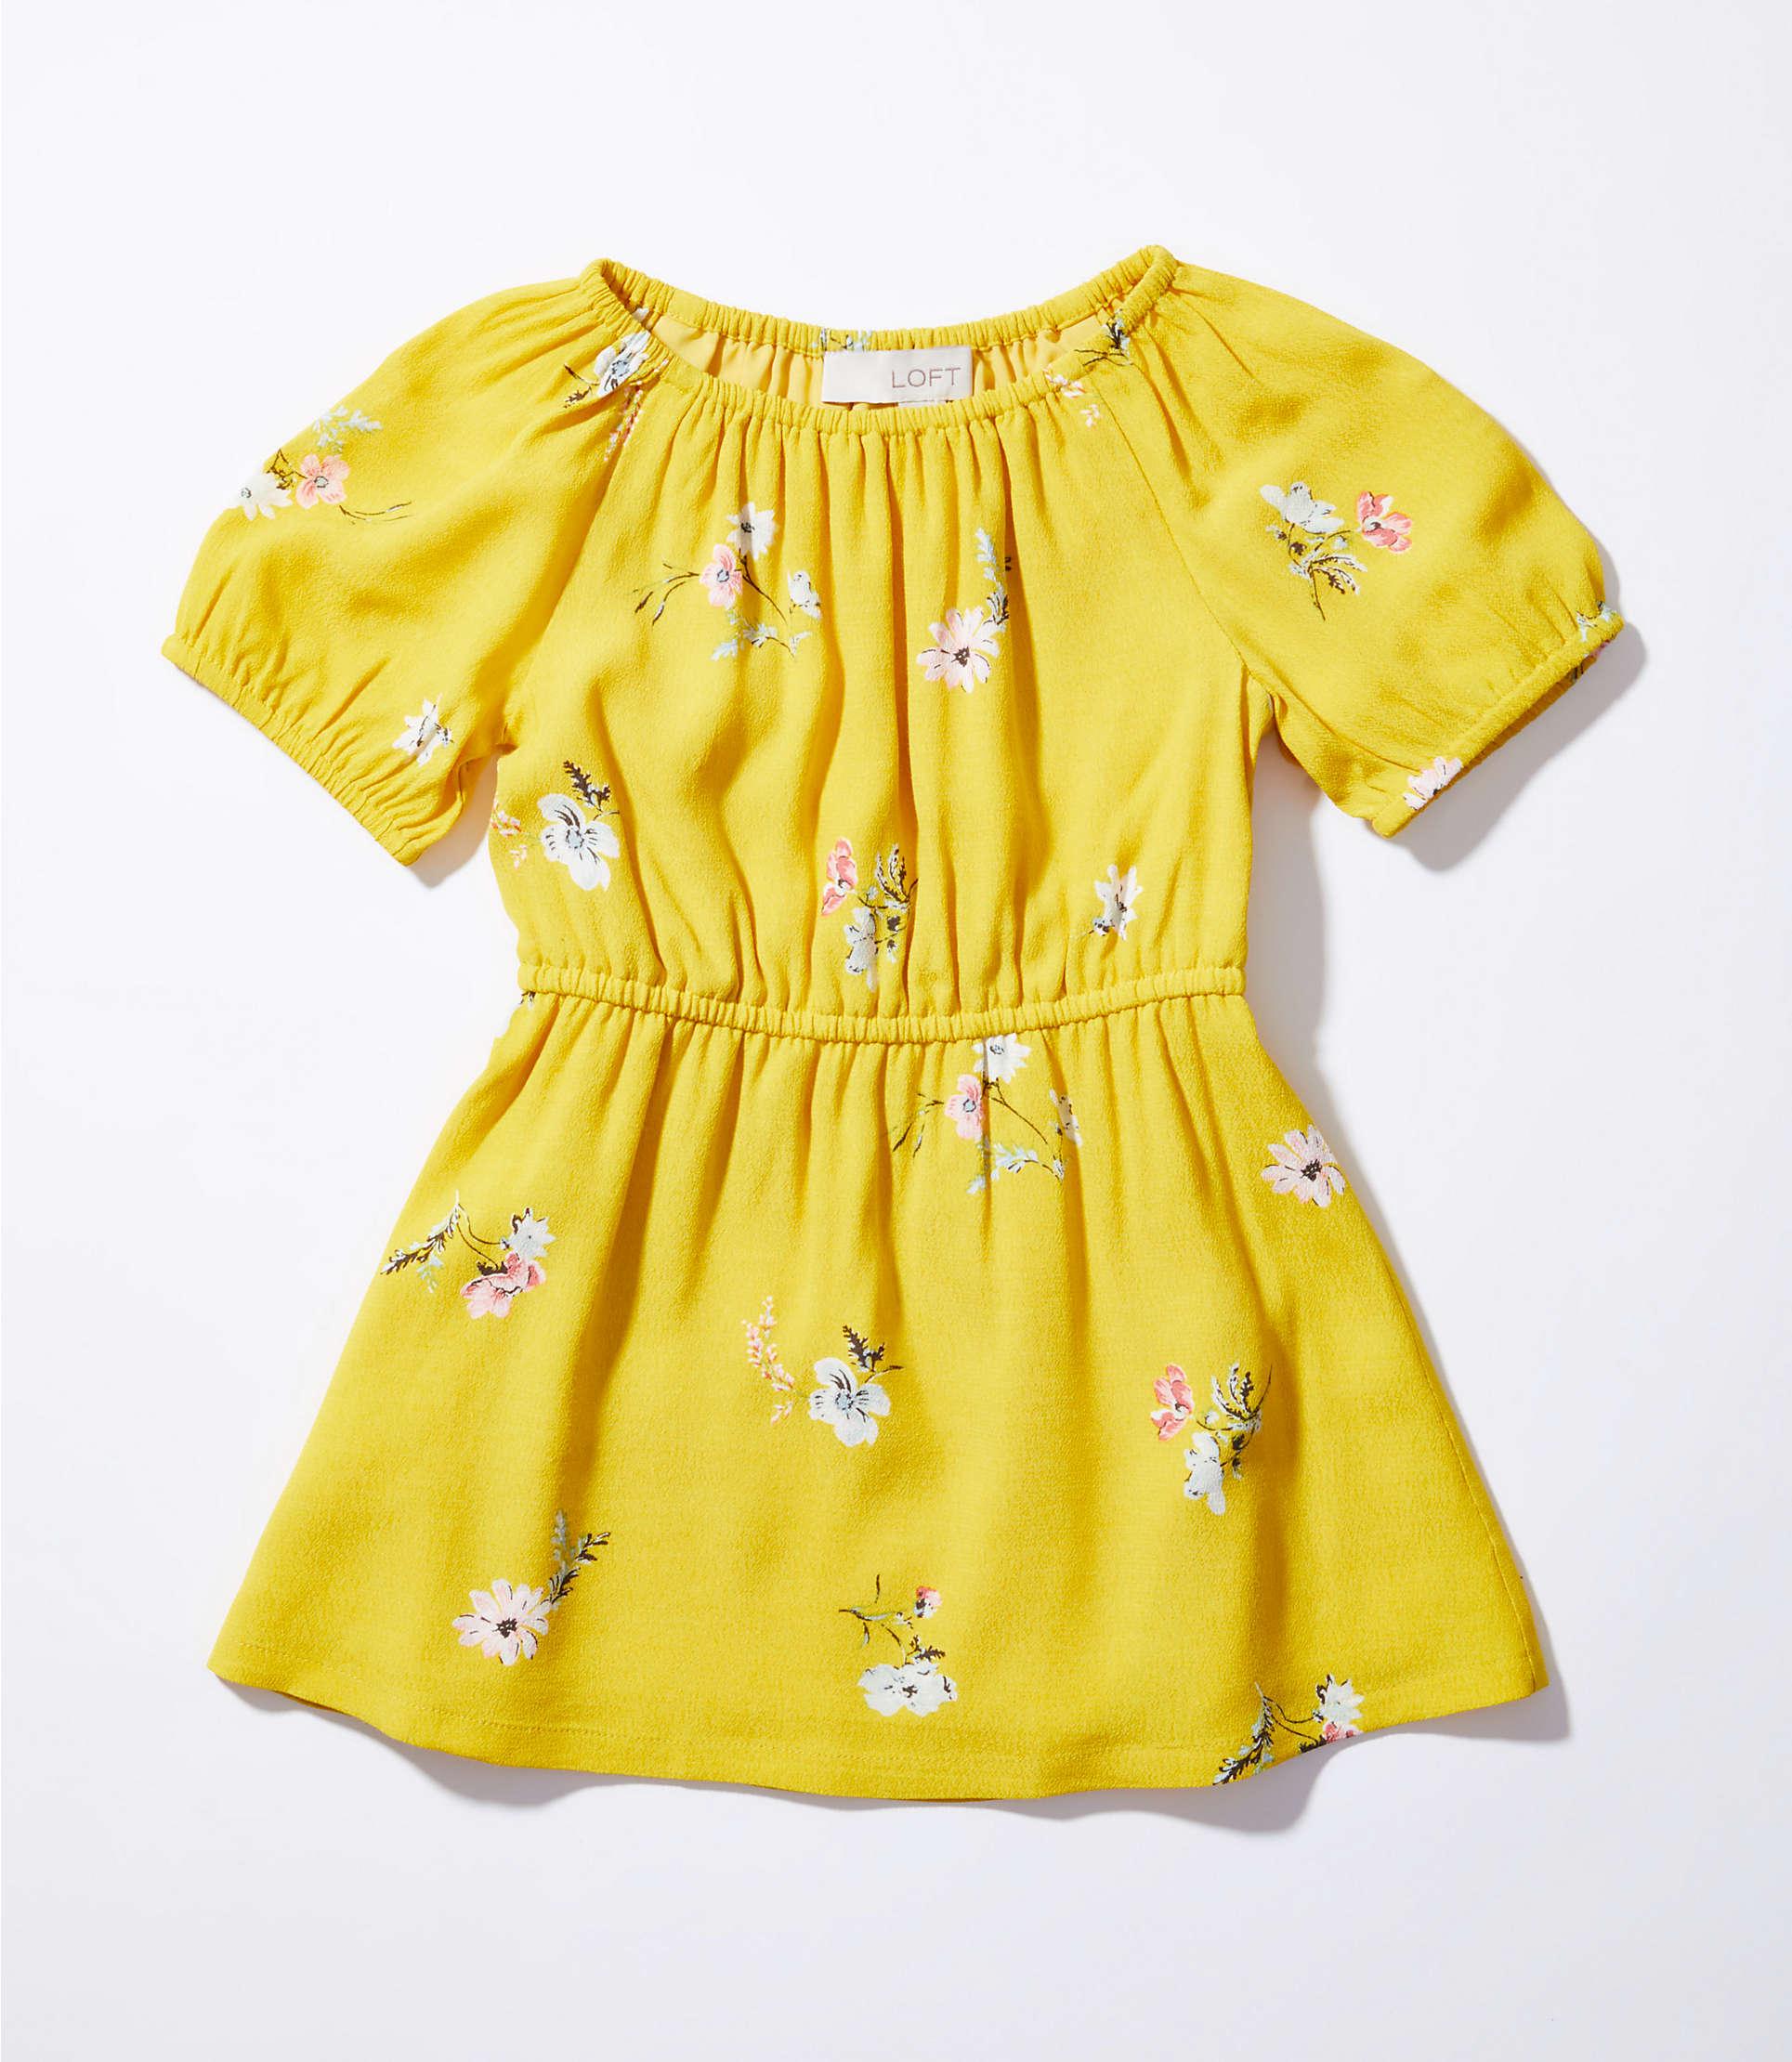 Loft Yellow Floral Dress Top Sellers ...